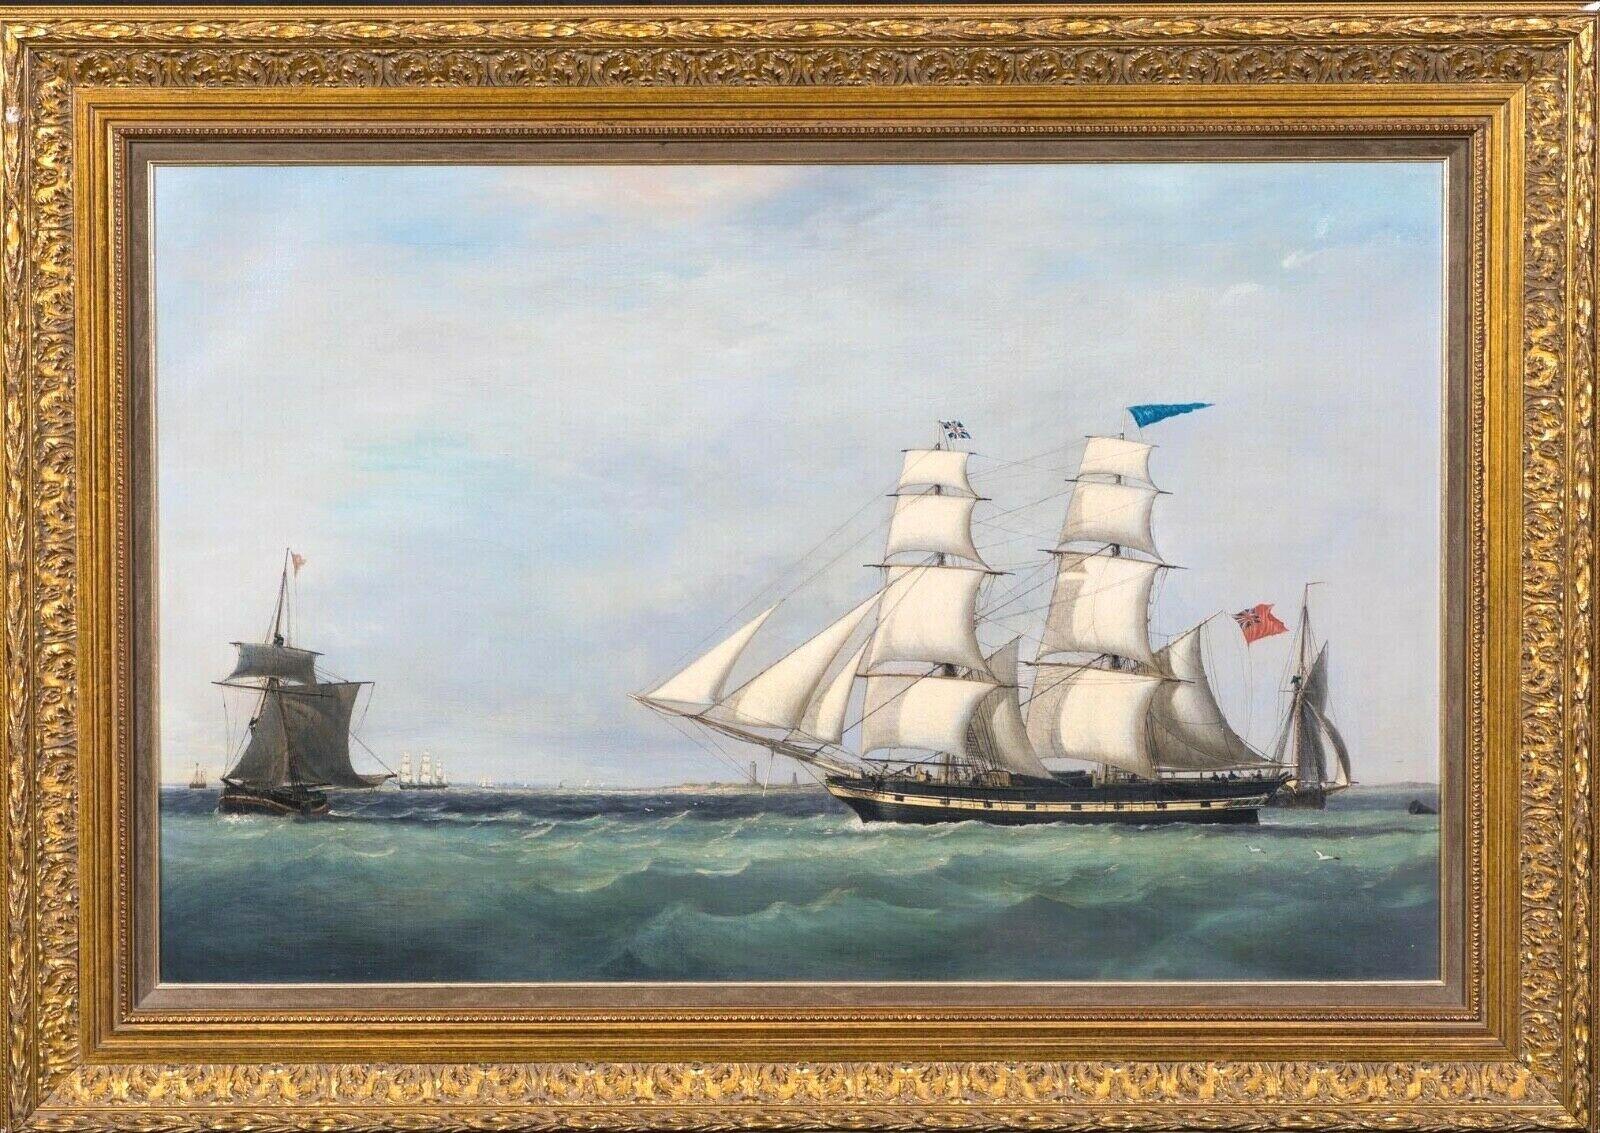 British Royal Navy Frigate Off A Busy Harbour, early 19th Century  - Painting by William John Huggins